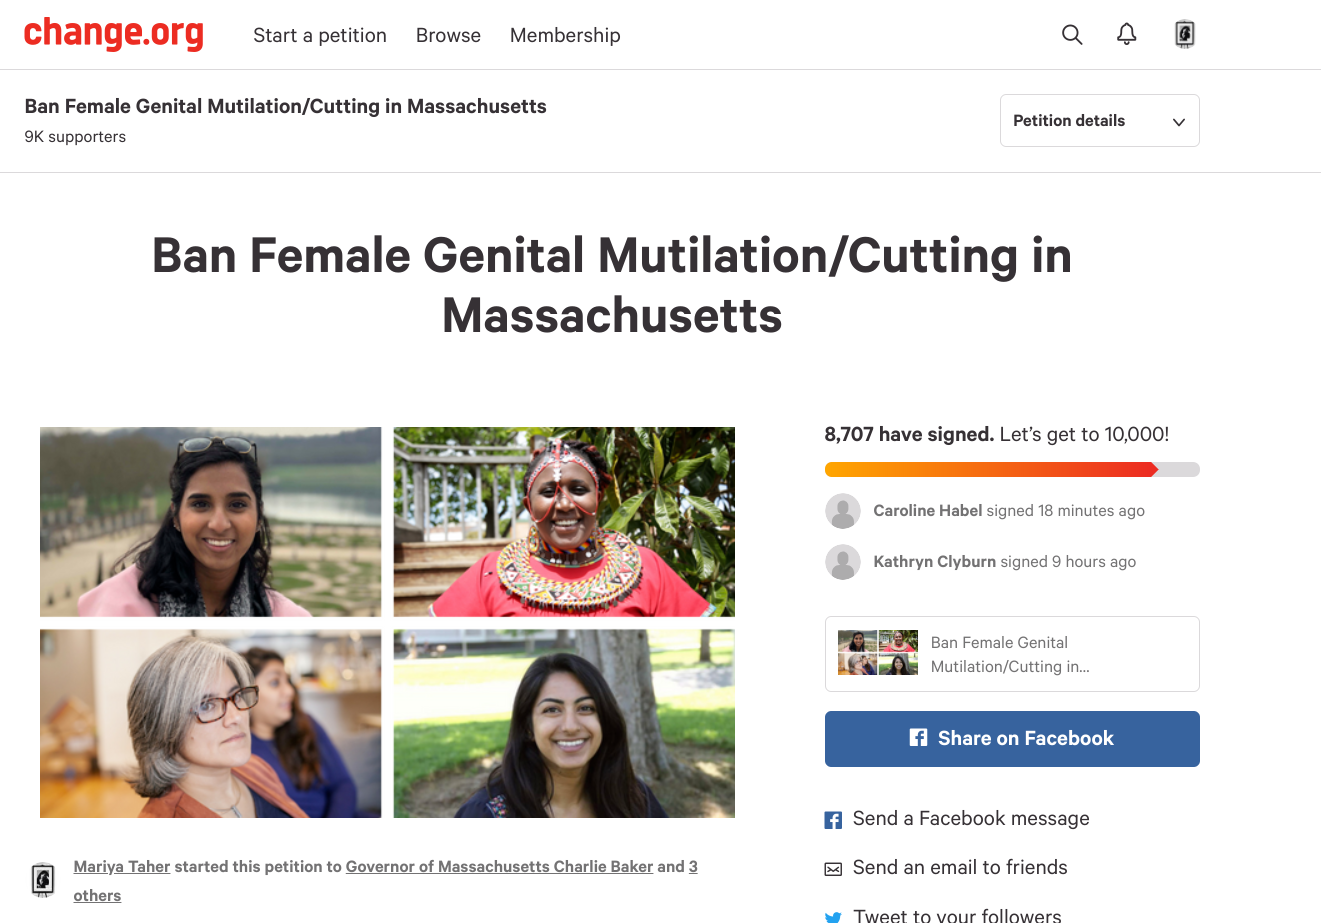 Why Won’t Massachusetts Pass A Law Against Female Genital Cutting?